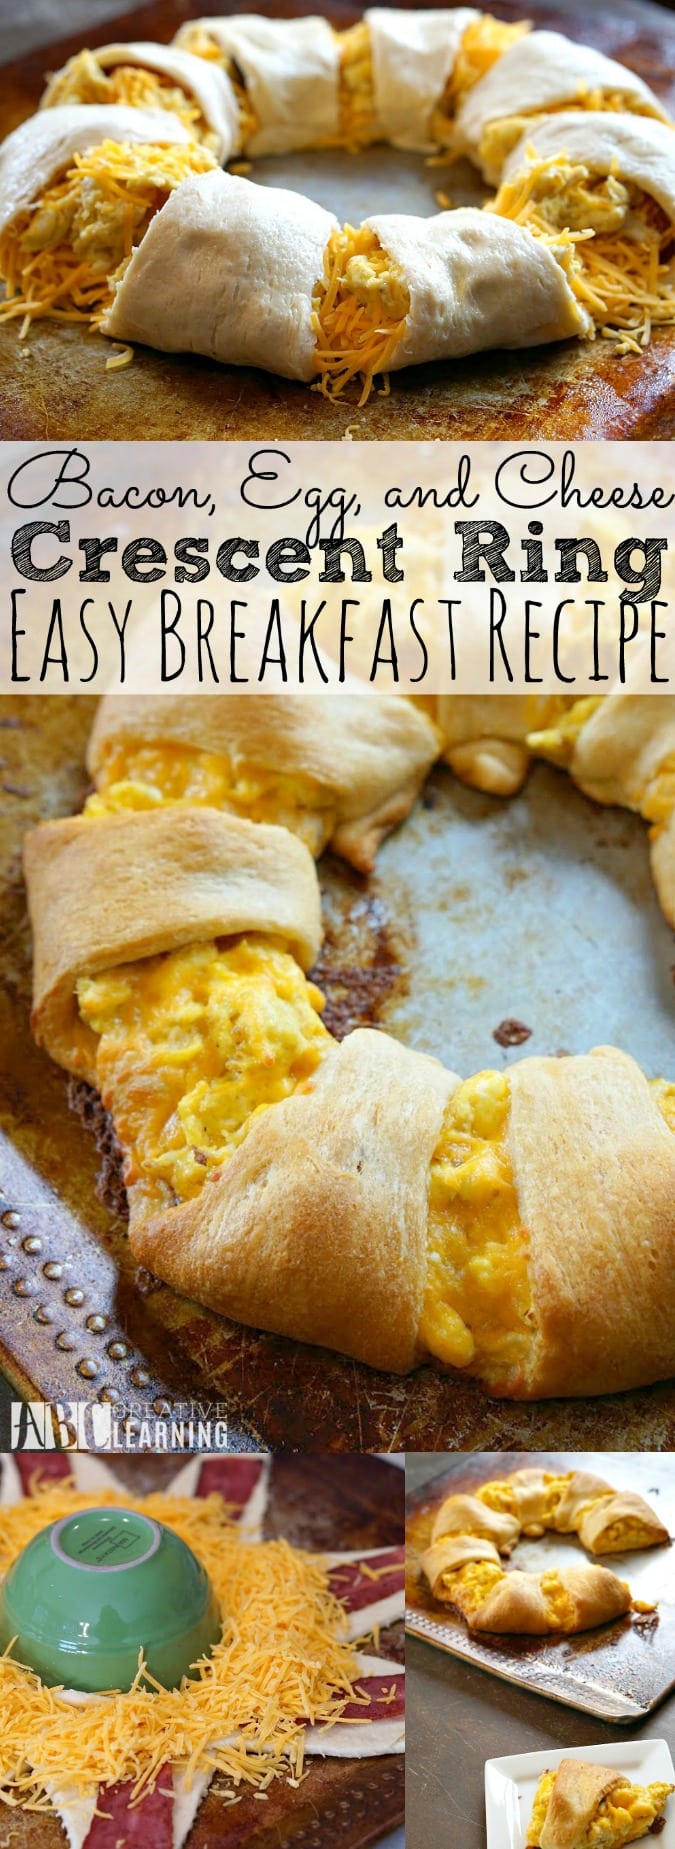 Bacon Egg and Cheese Crescent Ring